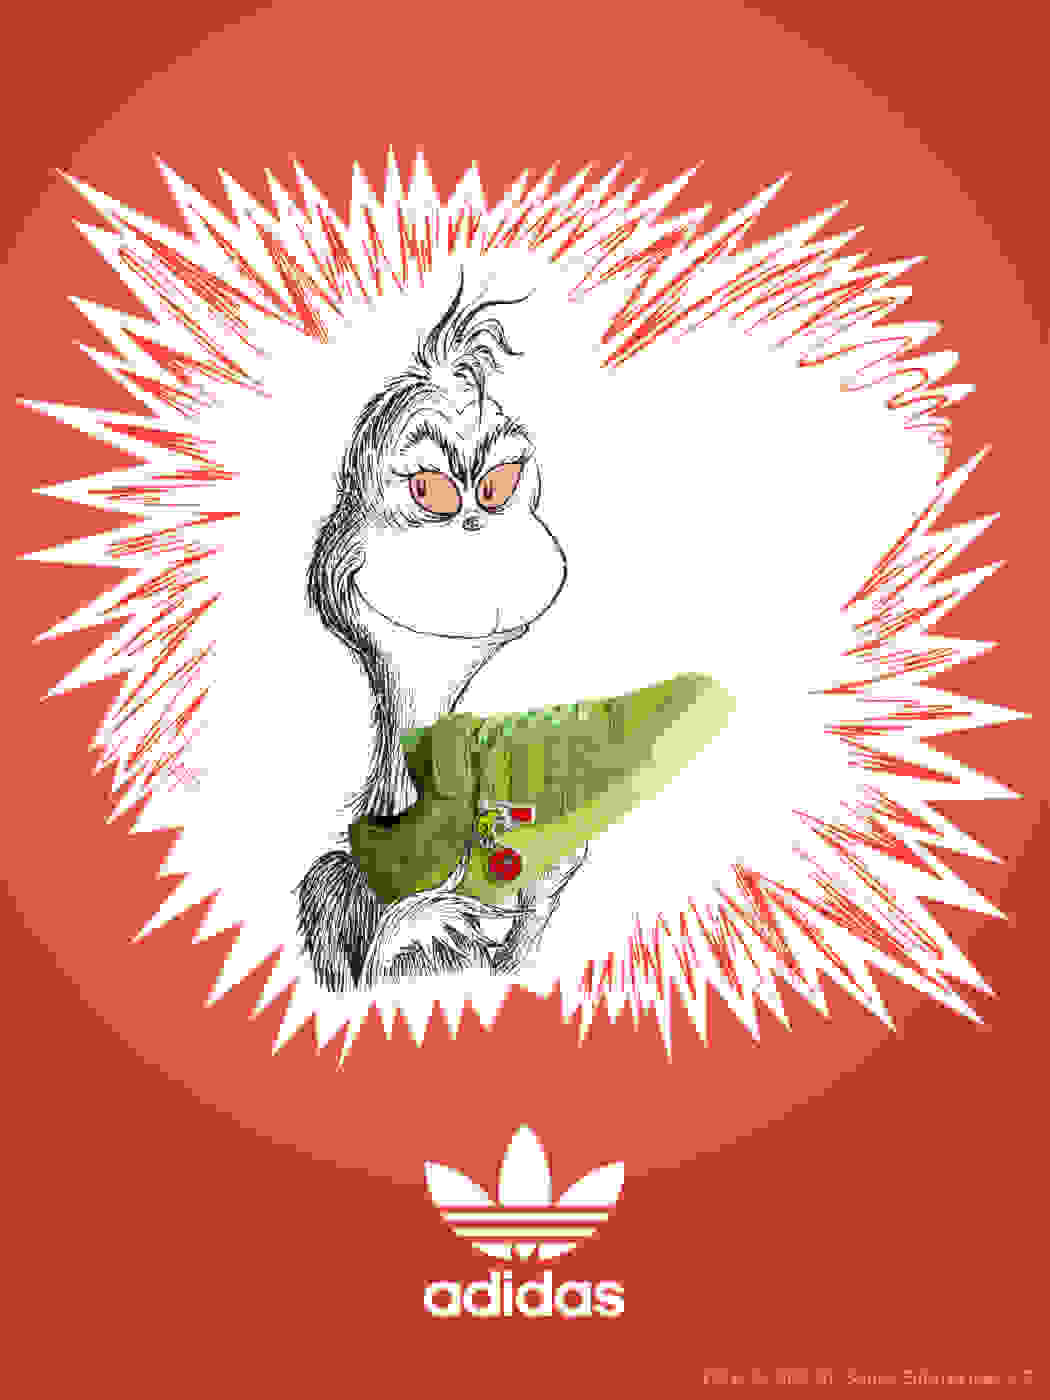 A red background with a pencil drawing of the Grinch holding the green Forum sneaker.